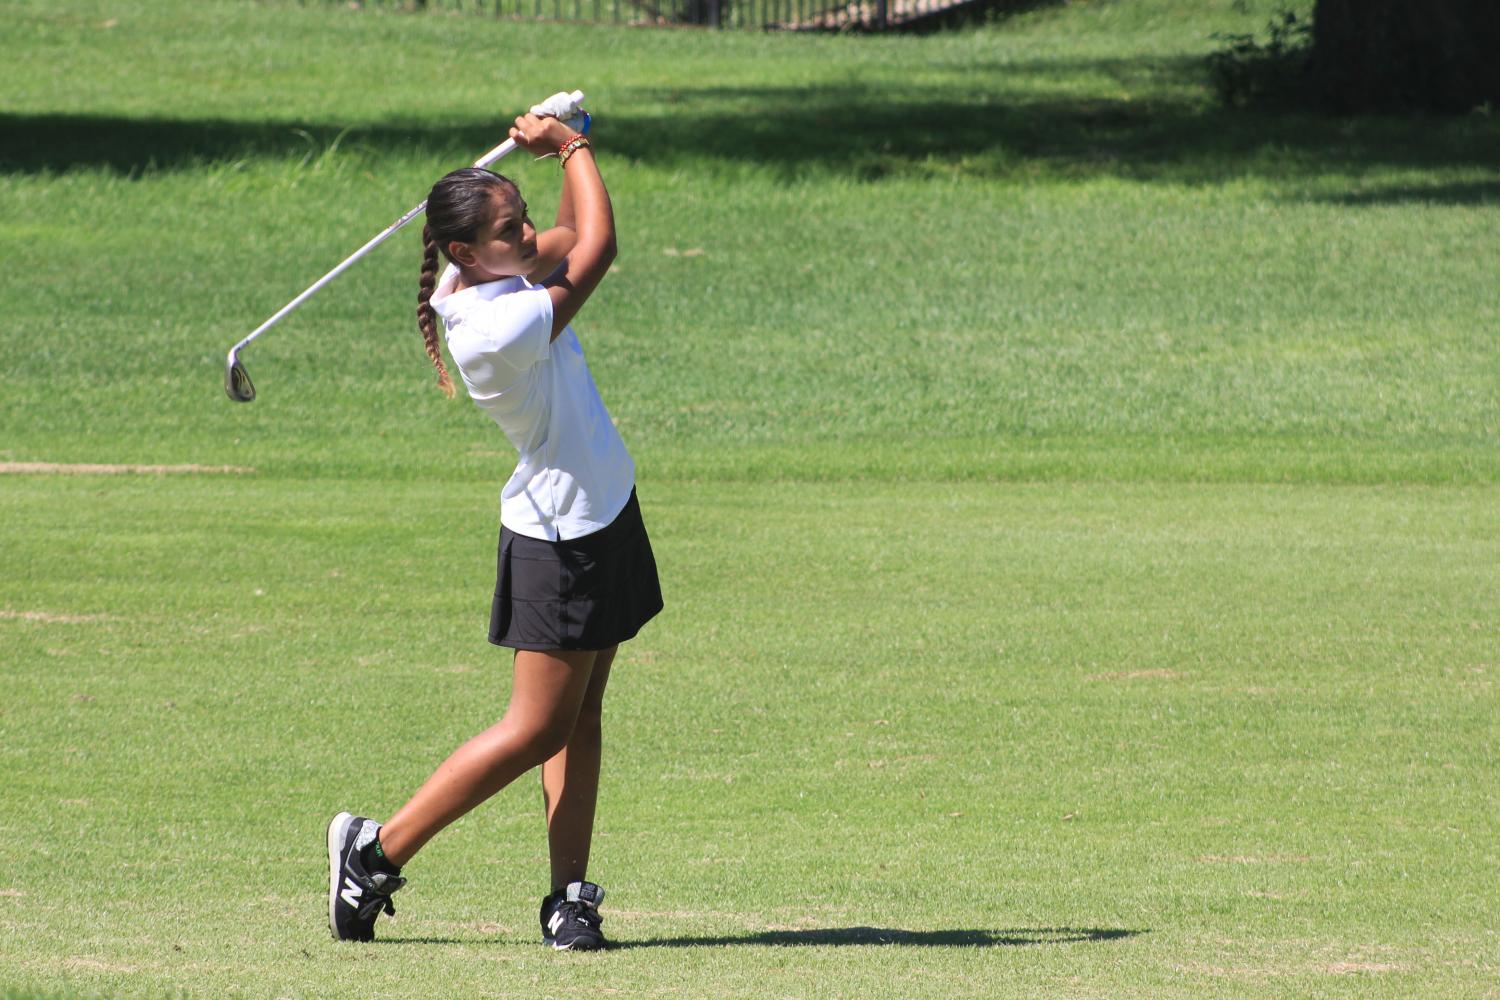 Sophomore Grace Gaume looks towards the ball after hitting it. Gaume scored an individual score of 39. photo by Zoe Butler